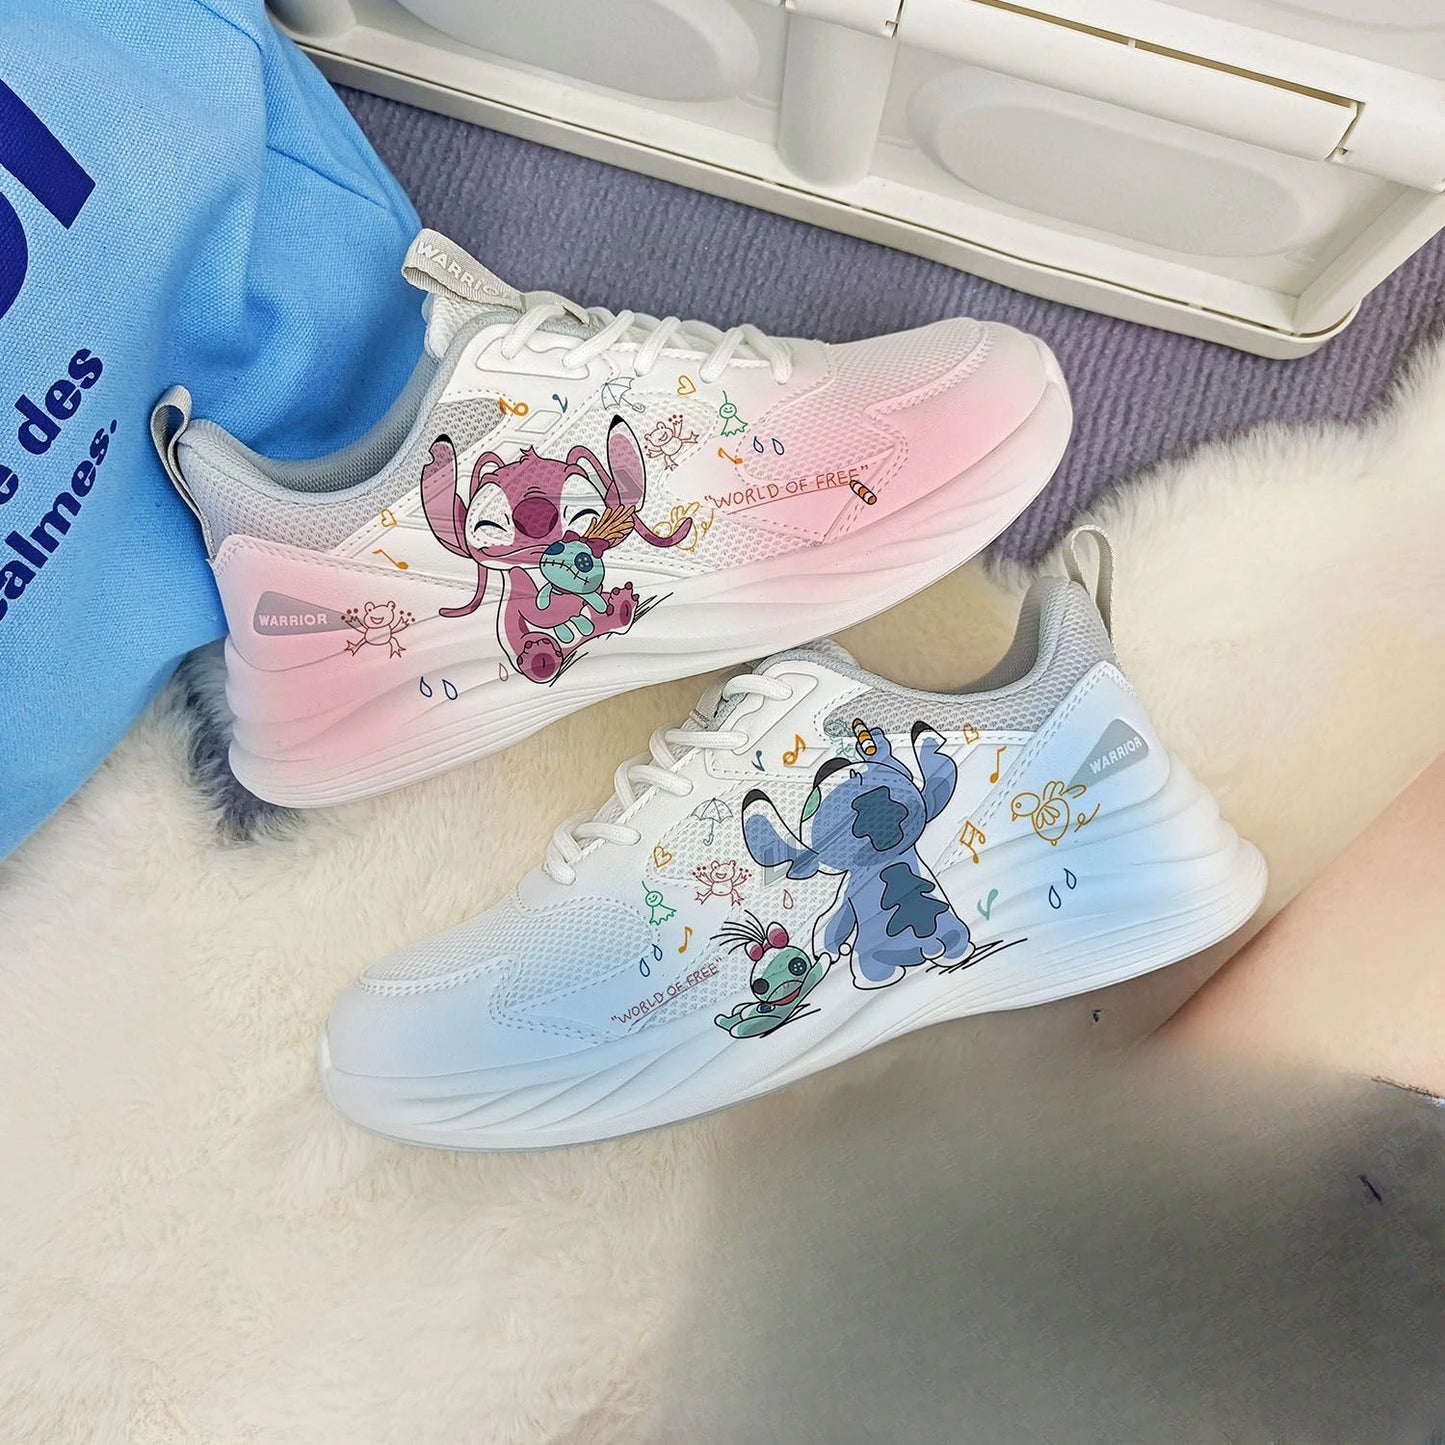 Sneakers Stitch fashion Chaussures confort